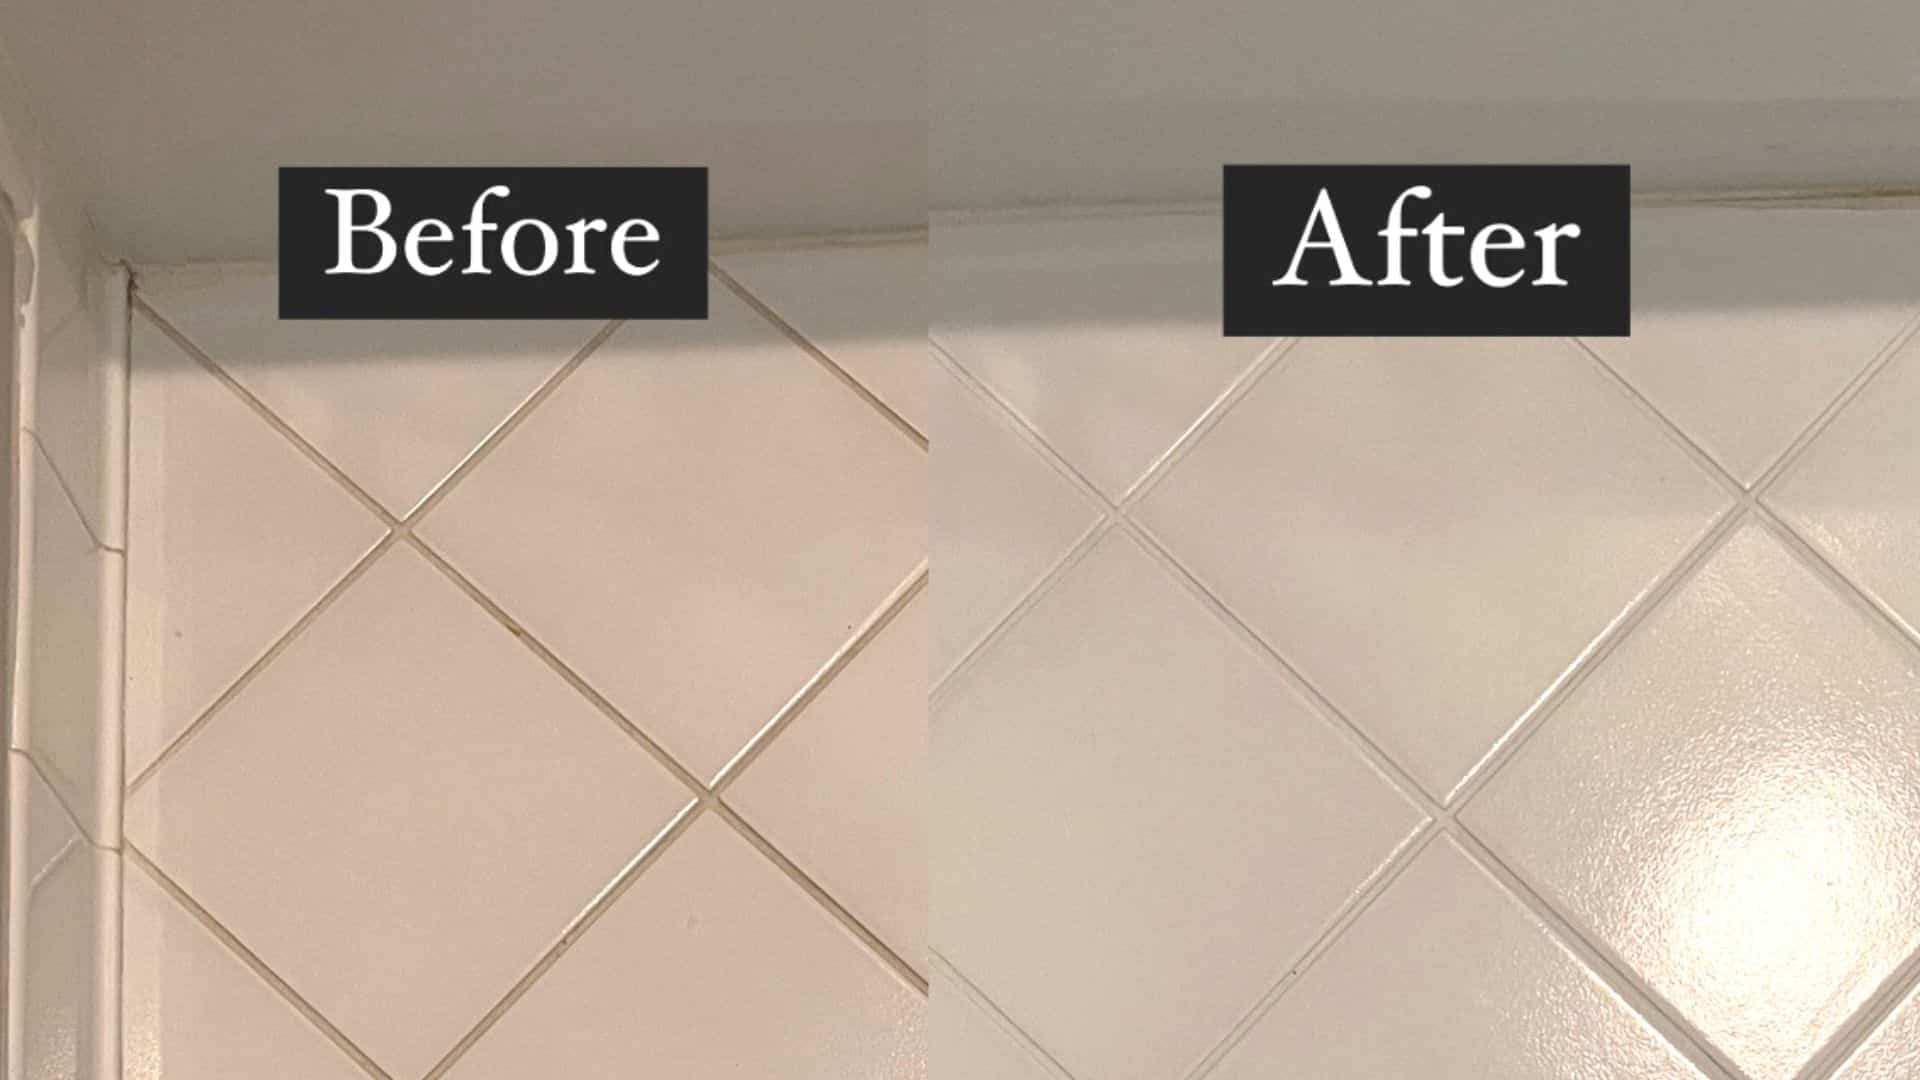 Need To Clean The Dirty Grout On Your Floor? Save Money And Do It Yourself!